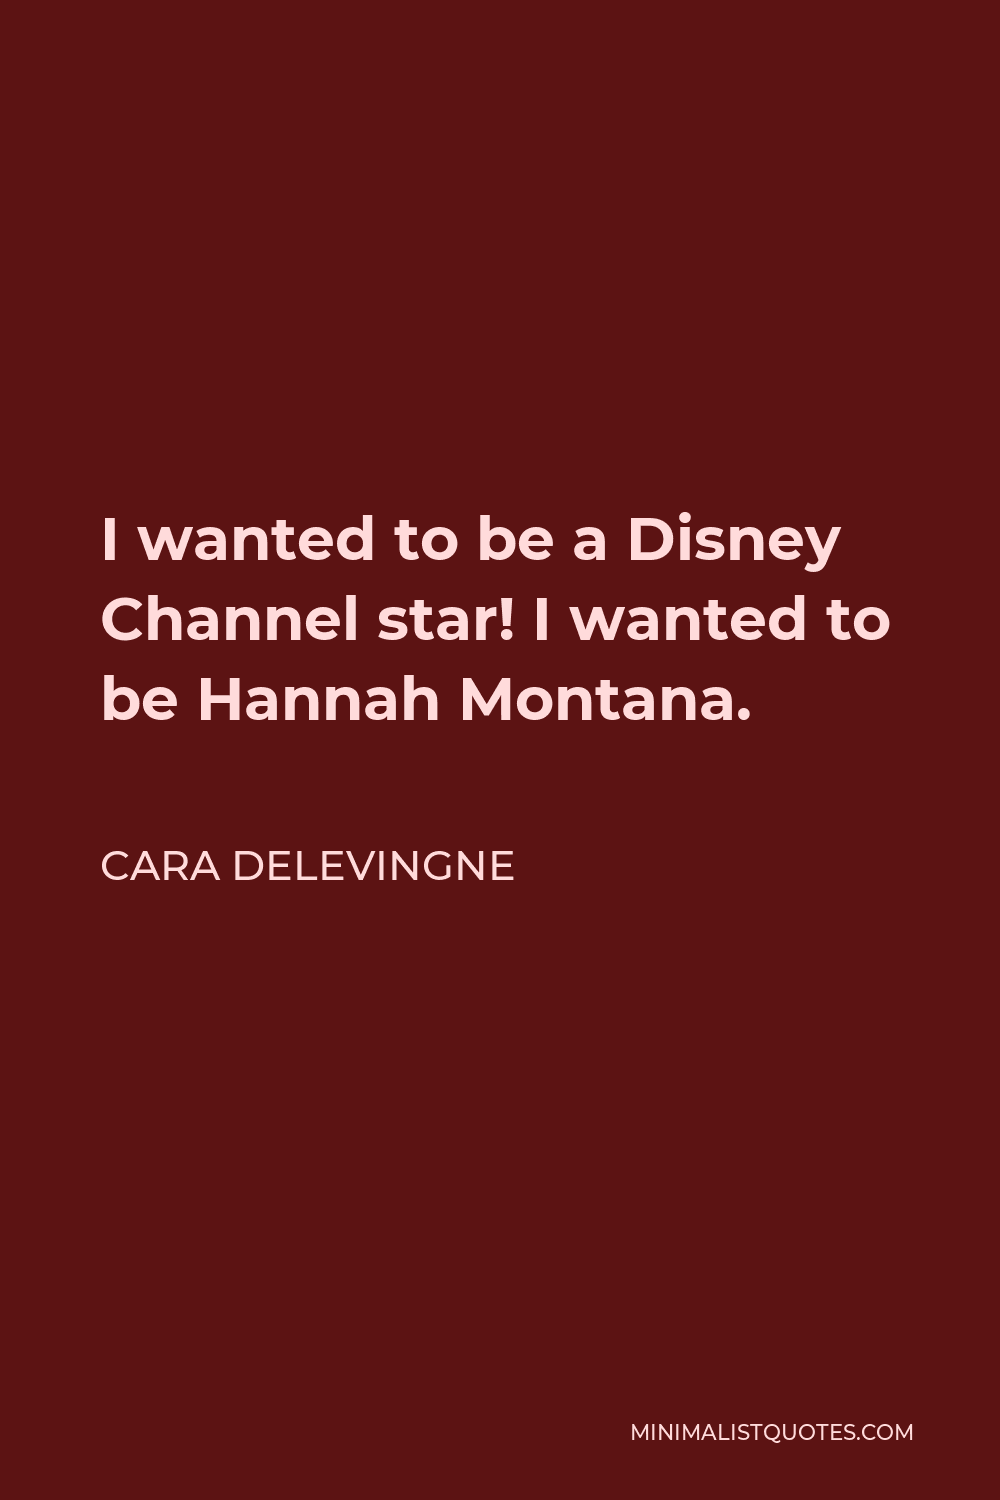 Cara Delevingne Quote - I wanted to be a Disney Channel star! I wanted to be Hannah Montana.